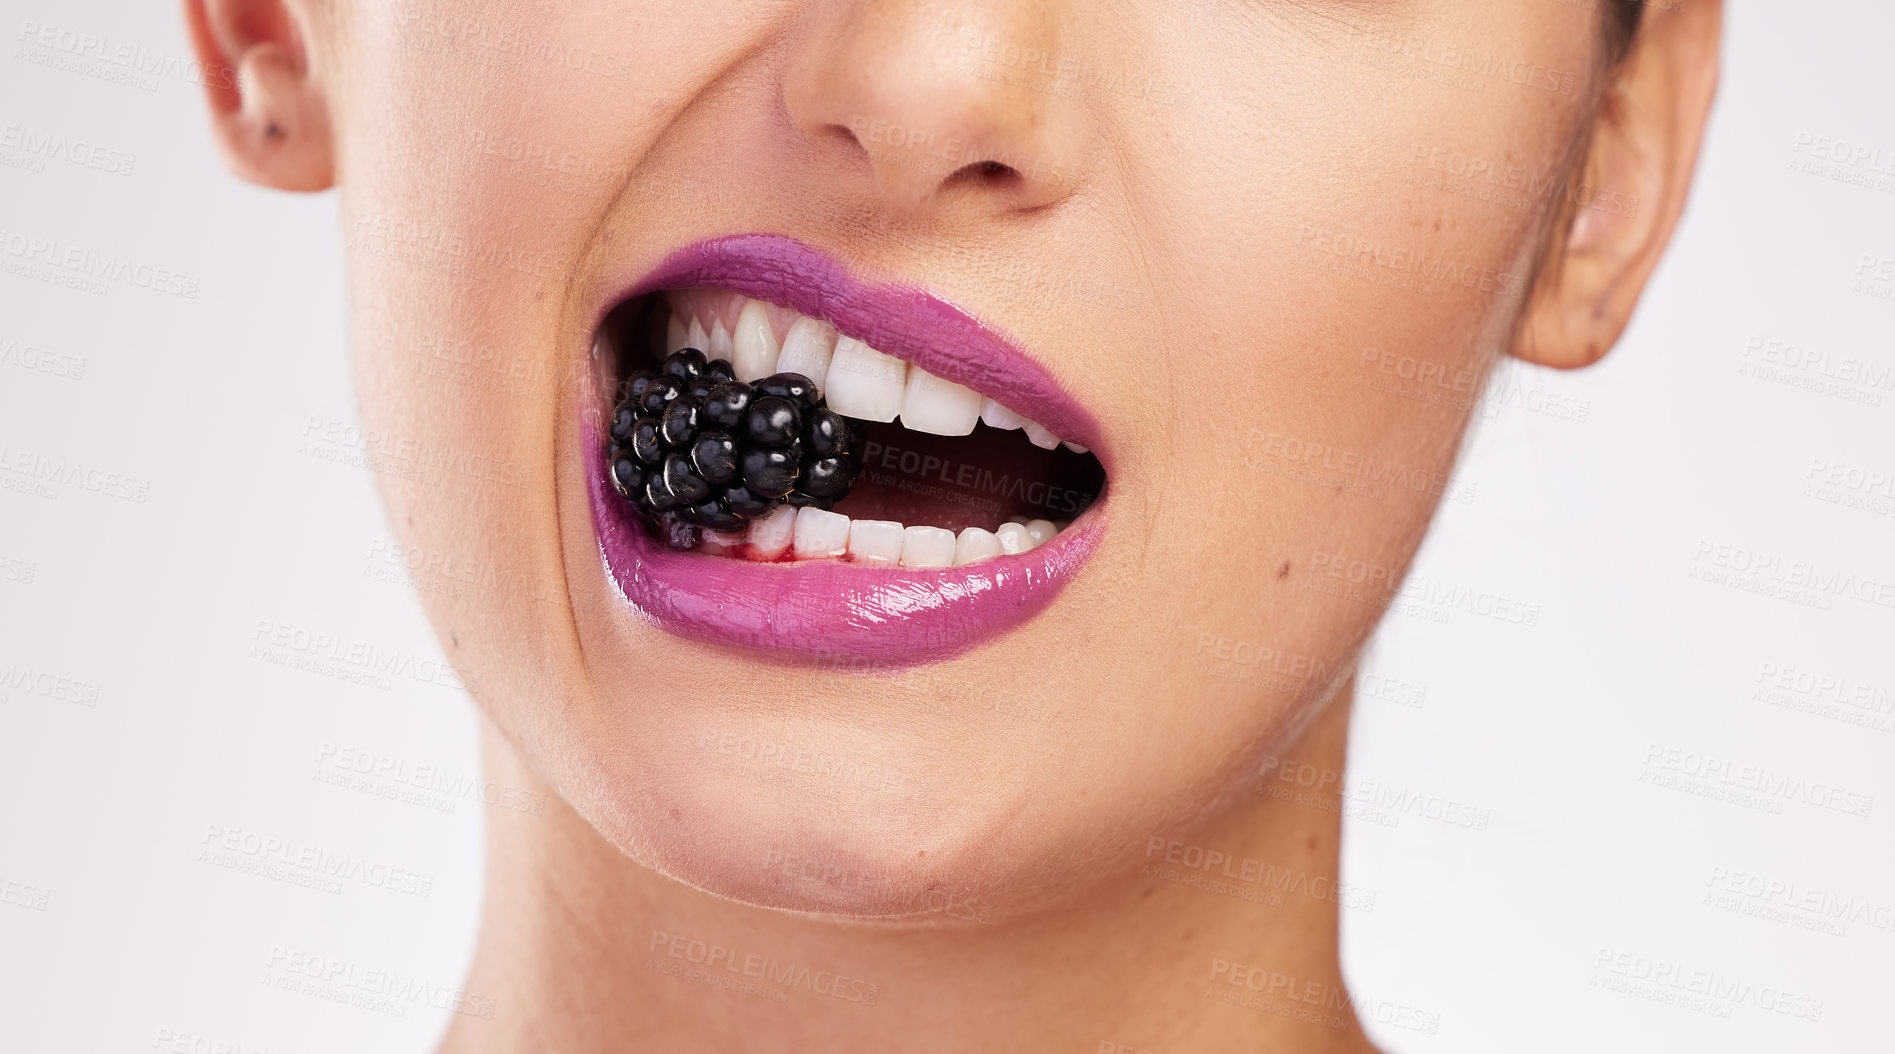 Buy stock photo Cropped shot of an attractive woman wearing purple lipstick and biting a blackberry against a studio background